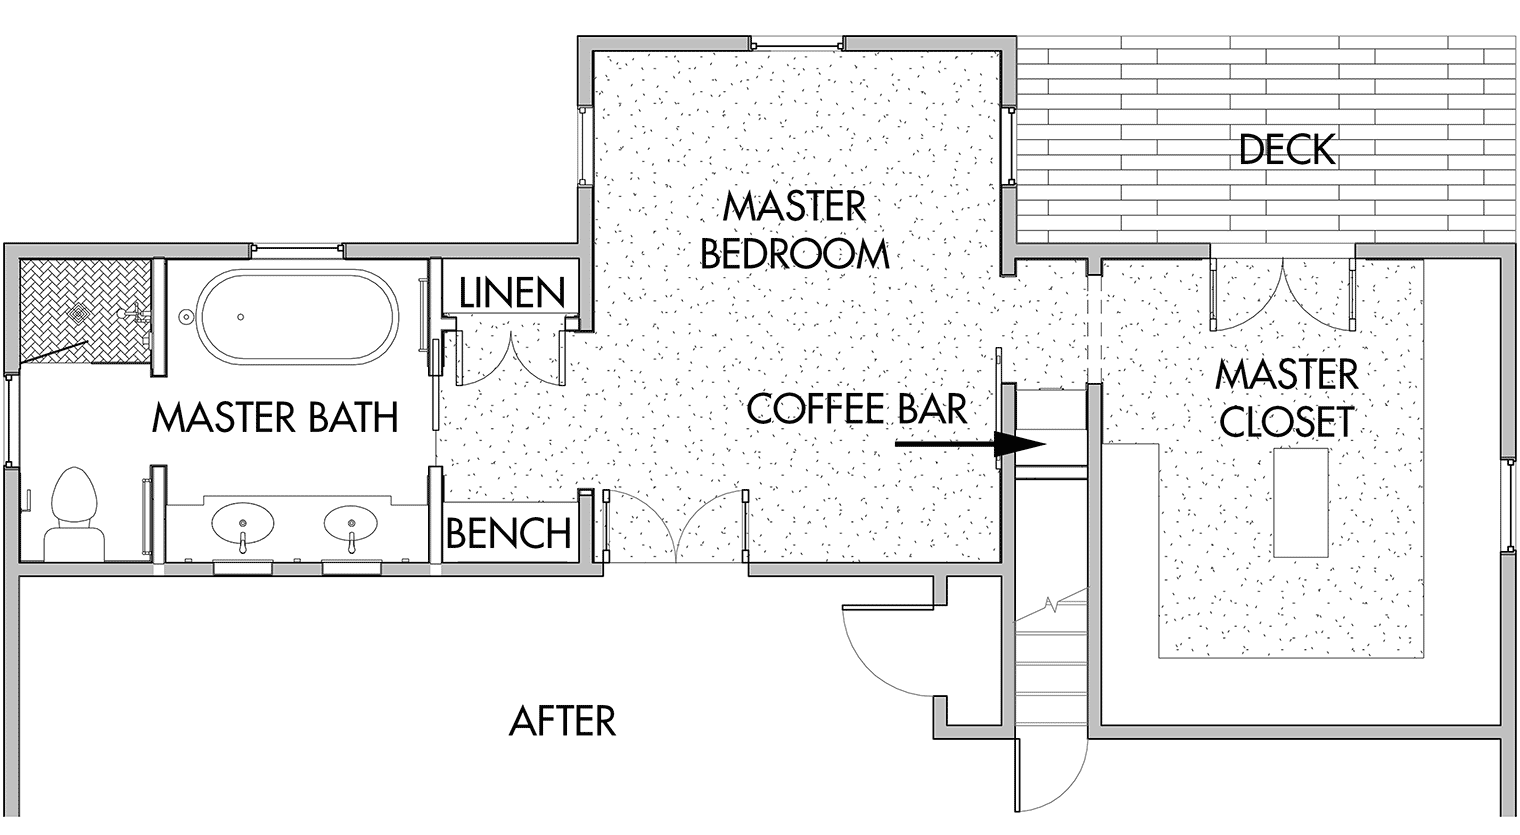 new floor plan to create master suite with coffee bar and deck access by utilizing former spare room